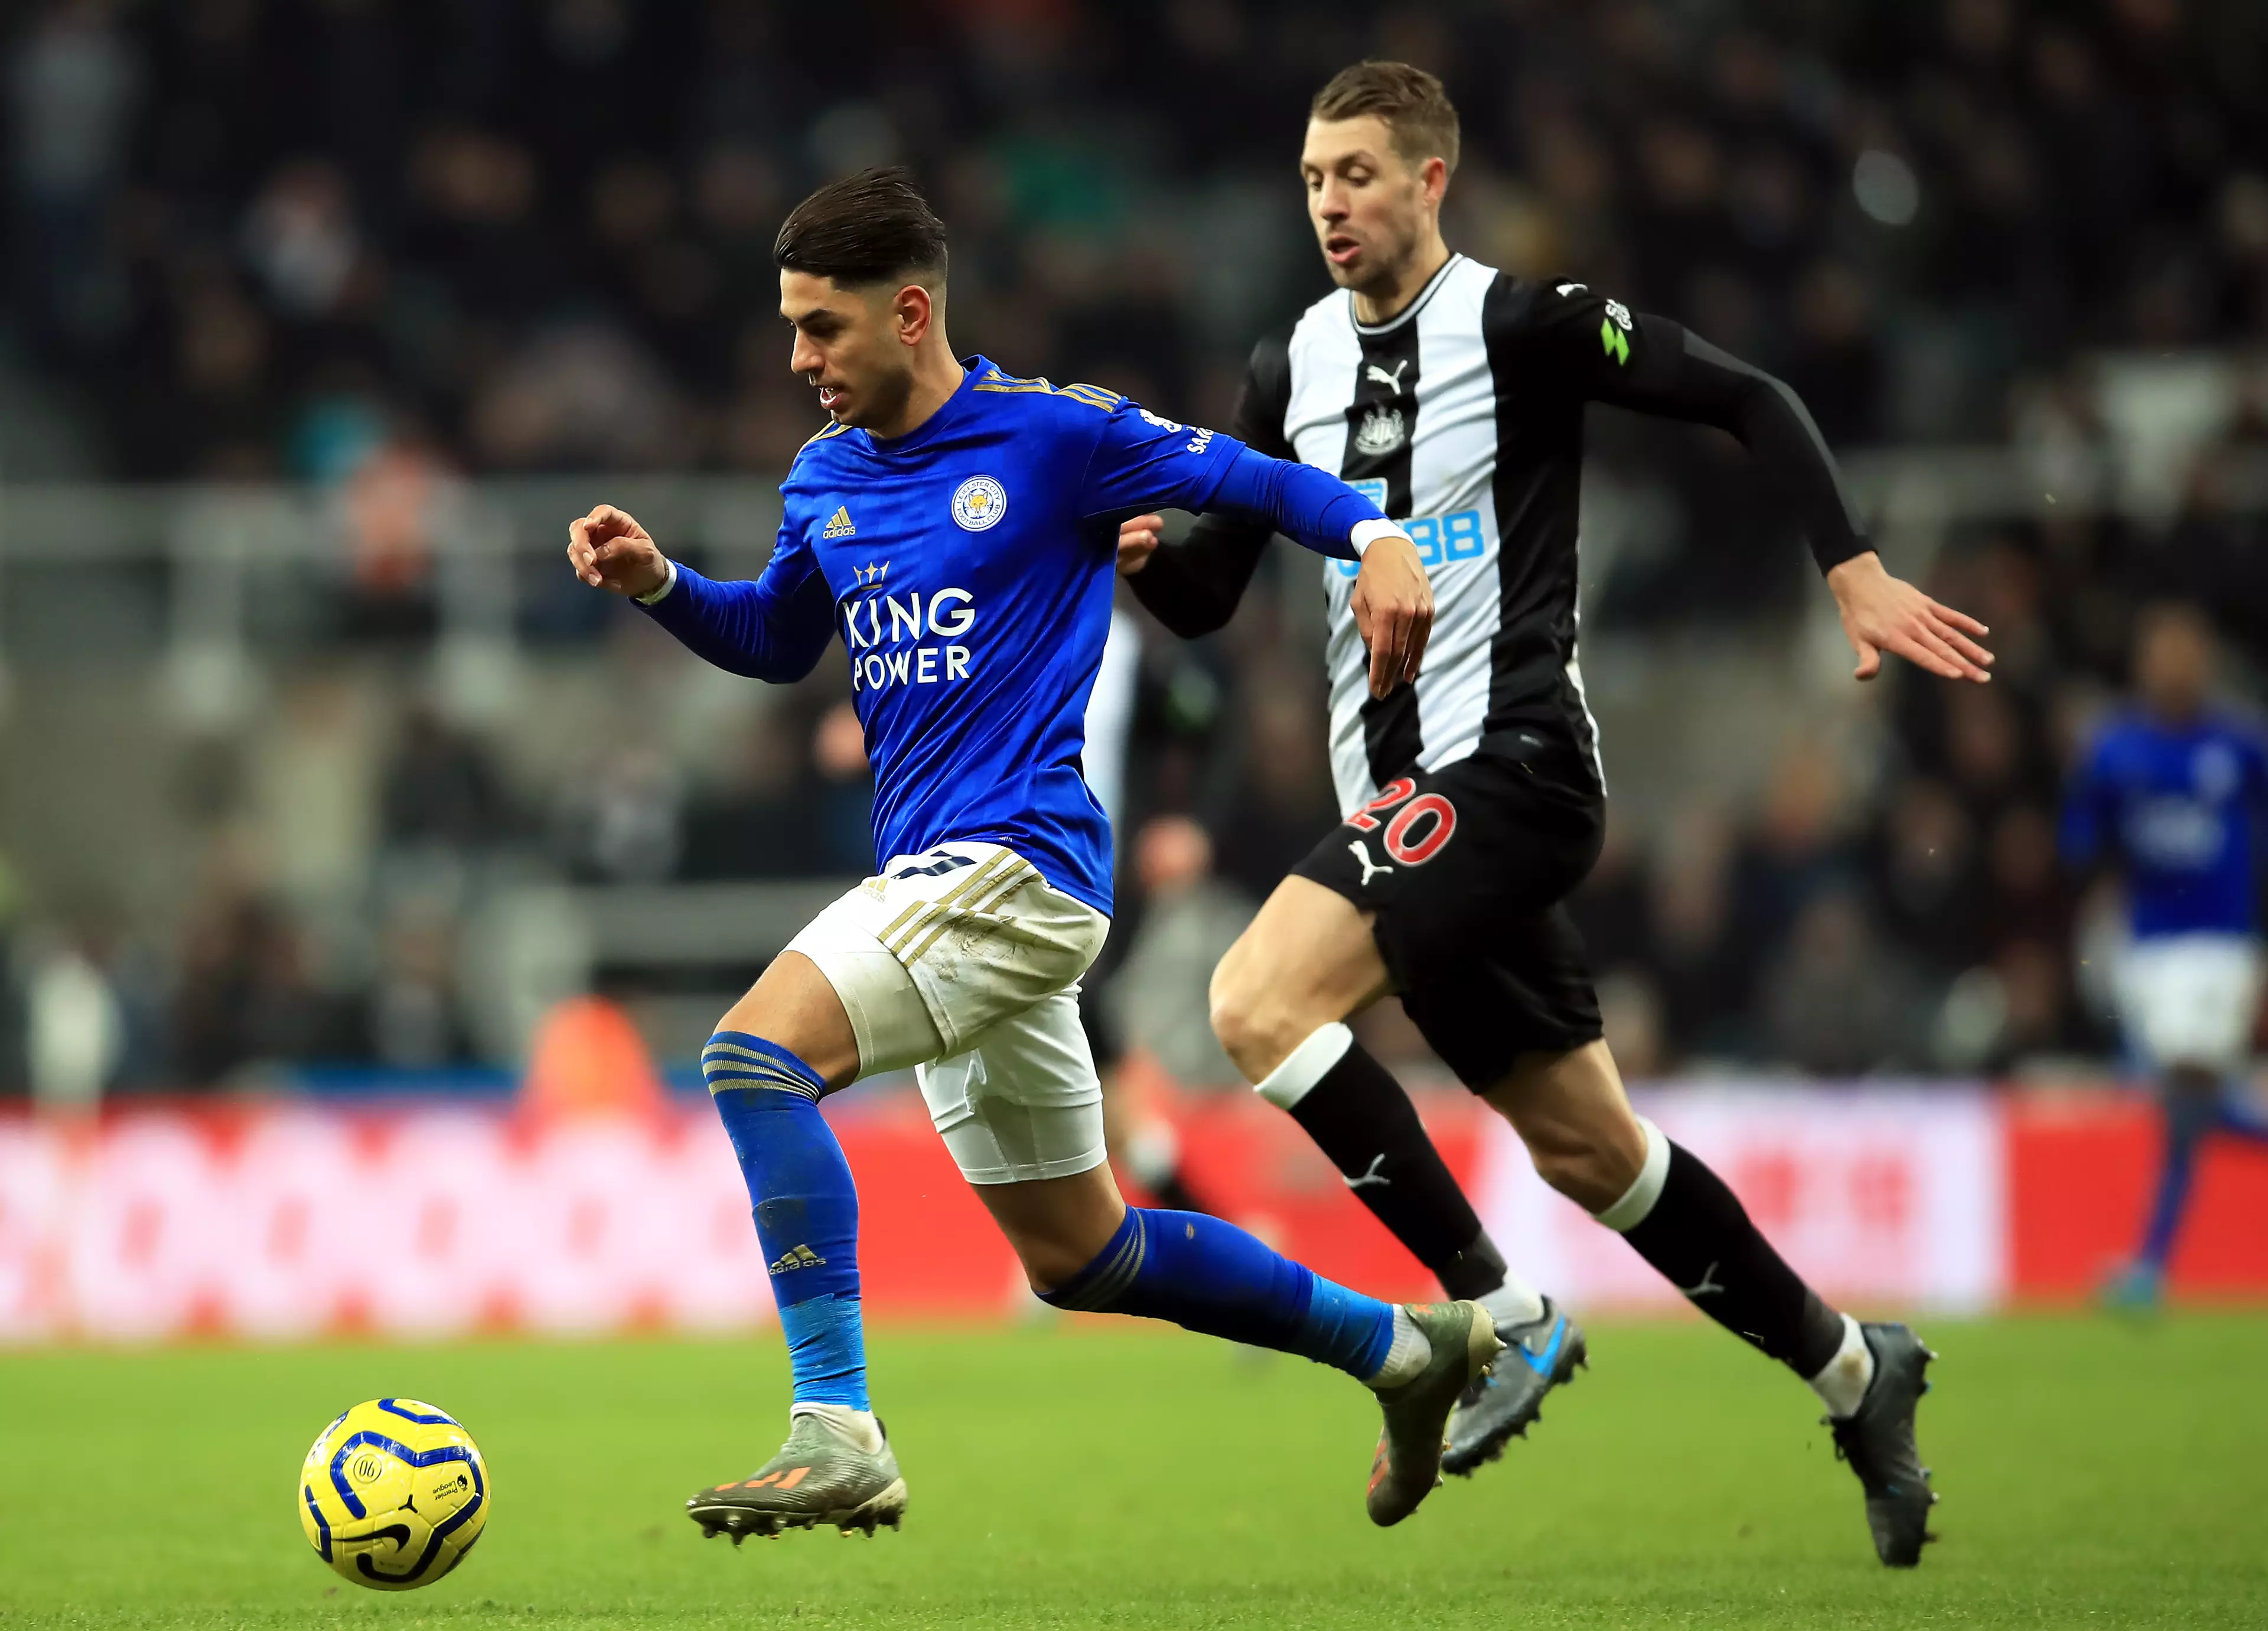 Lejeune battles with Leicester City attacker Ayoze Perez. (Image